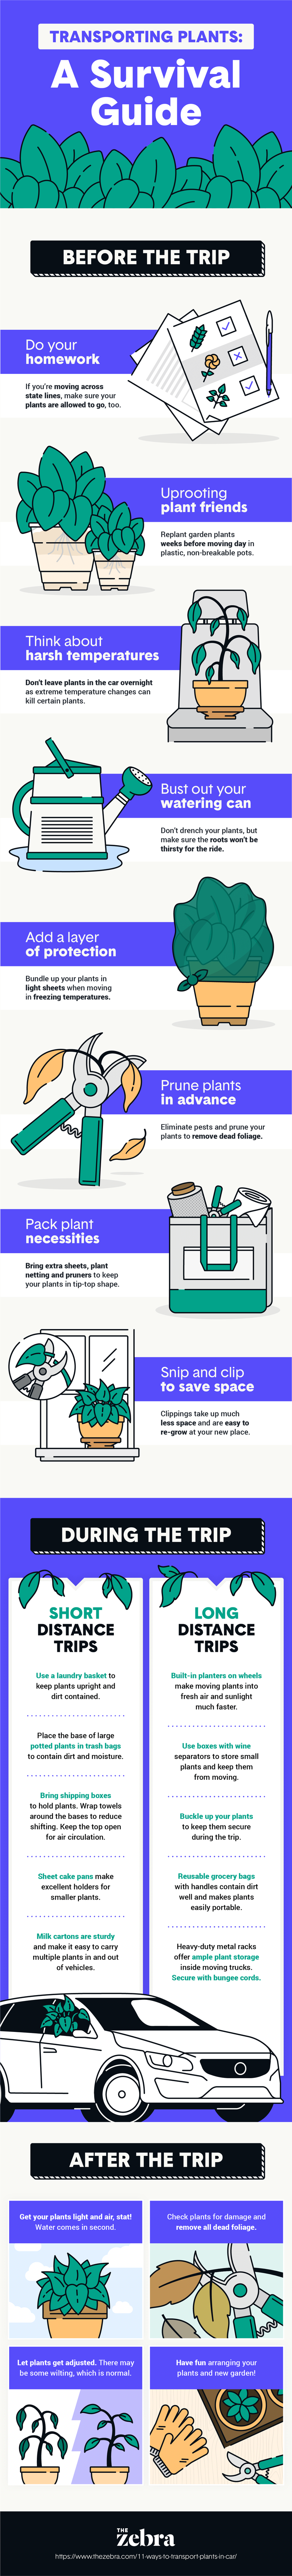 how to transport plants in a car infographic